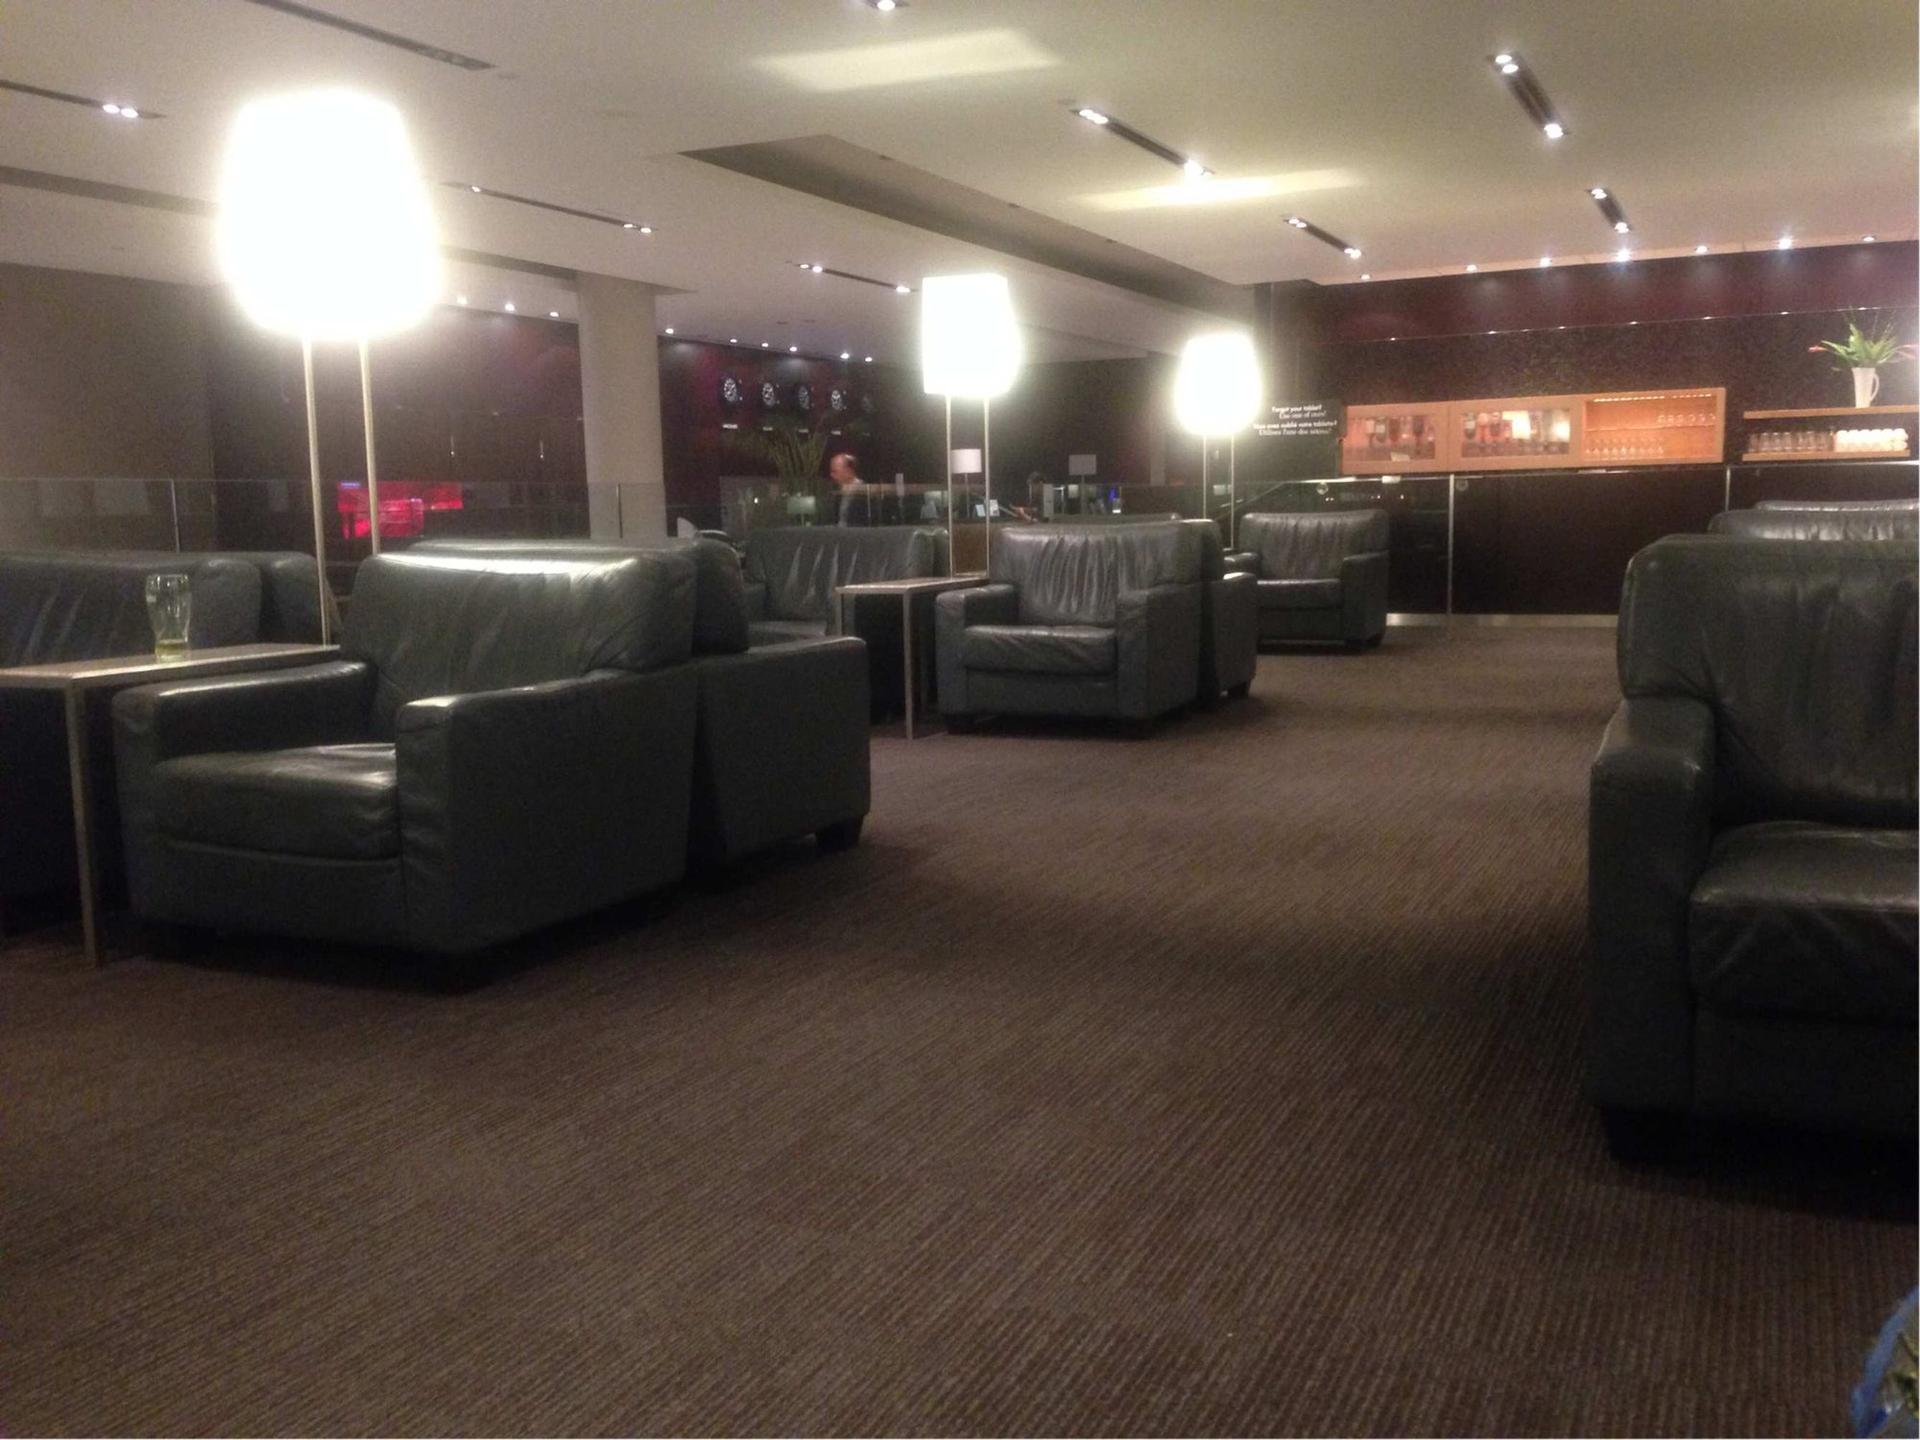 Air Canada Maple Leaf Lounge image 10 of 21